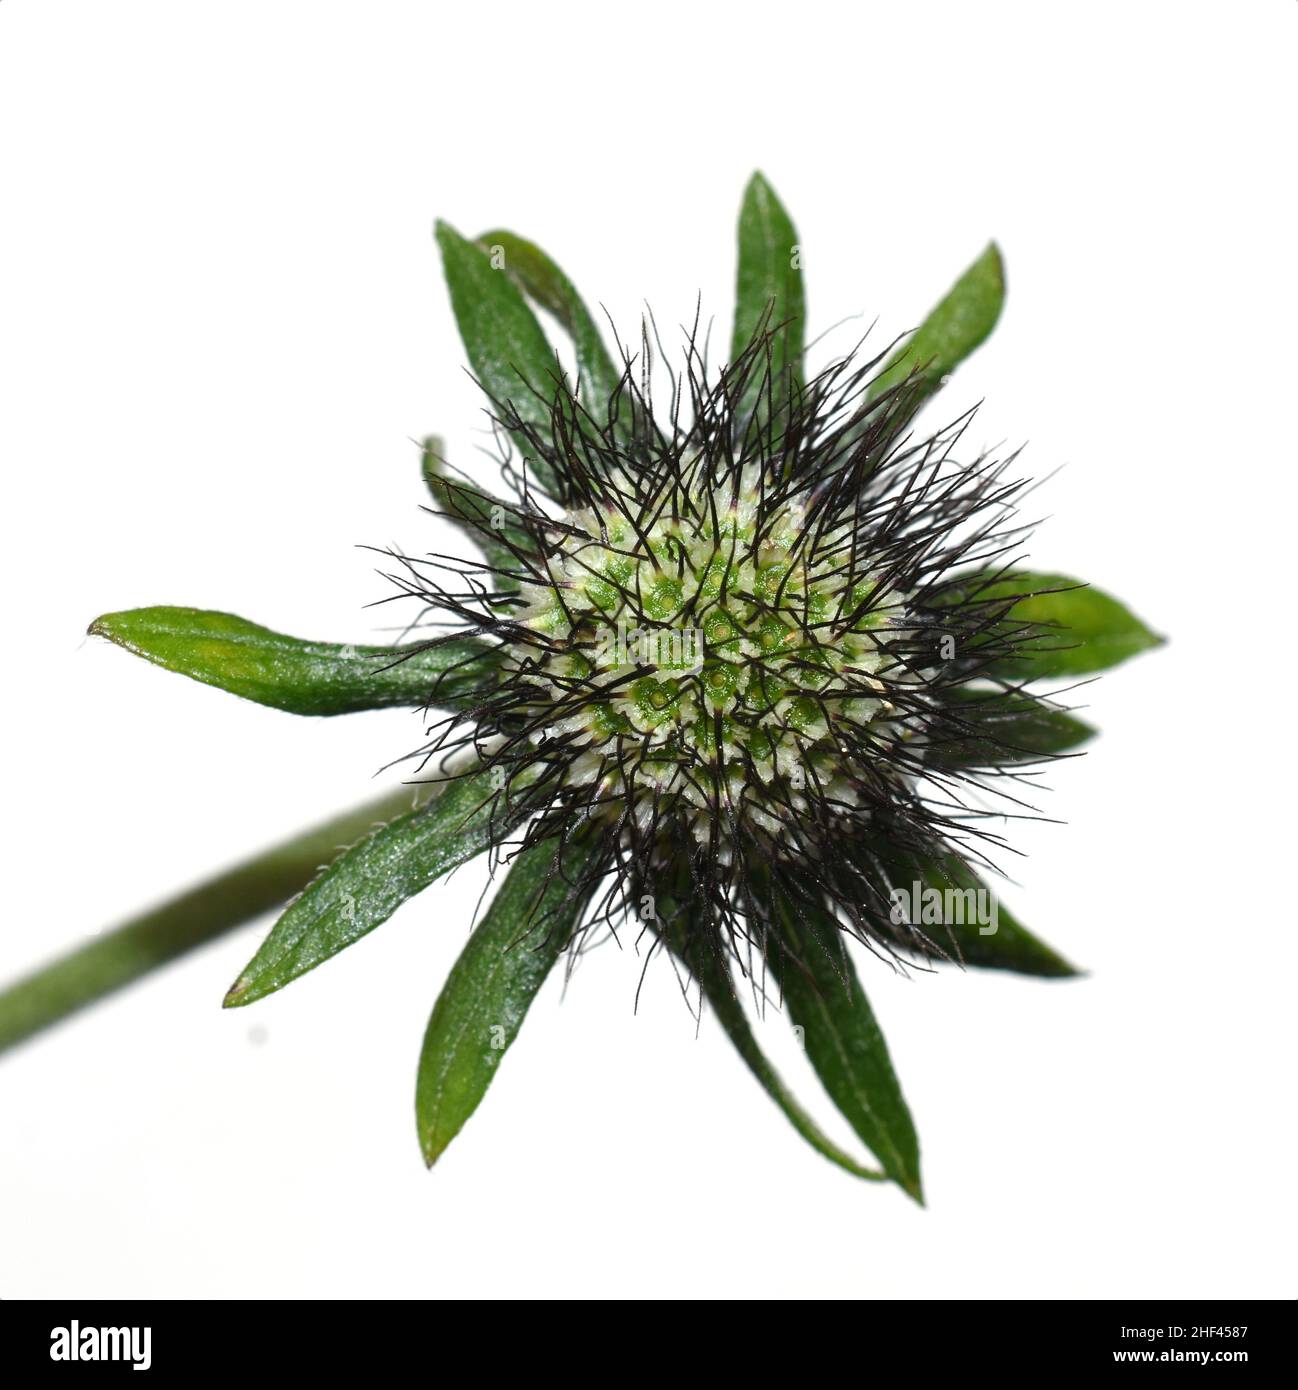 Flowered seed ball of scabiosa pincushion flower plant on white background Stock Photo